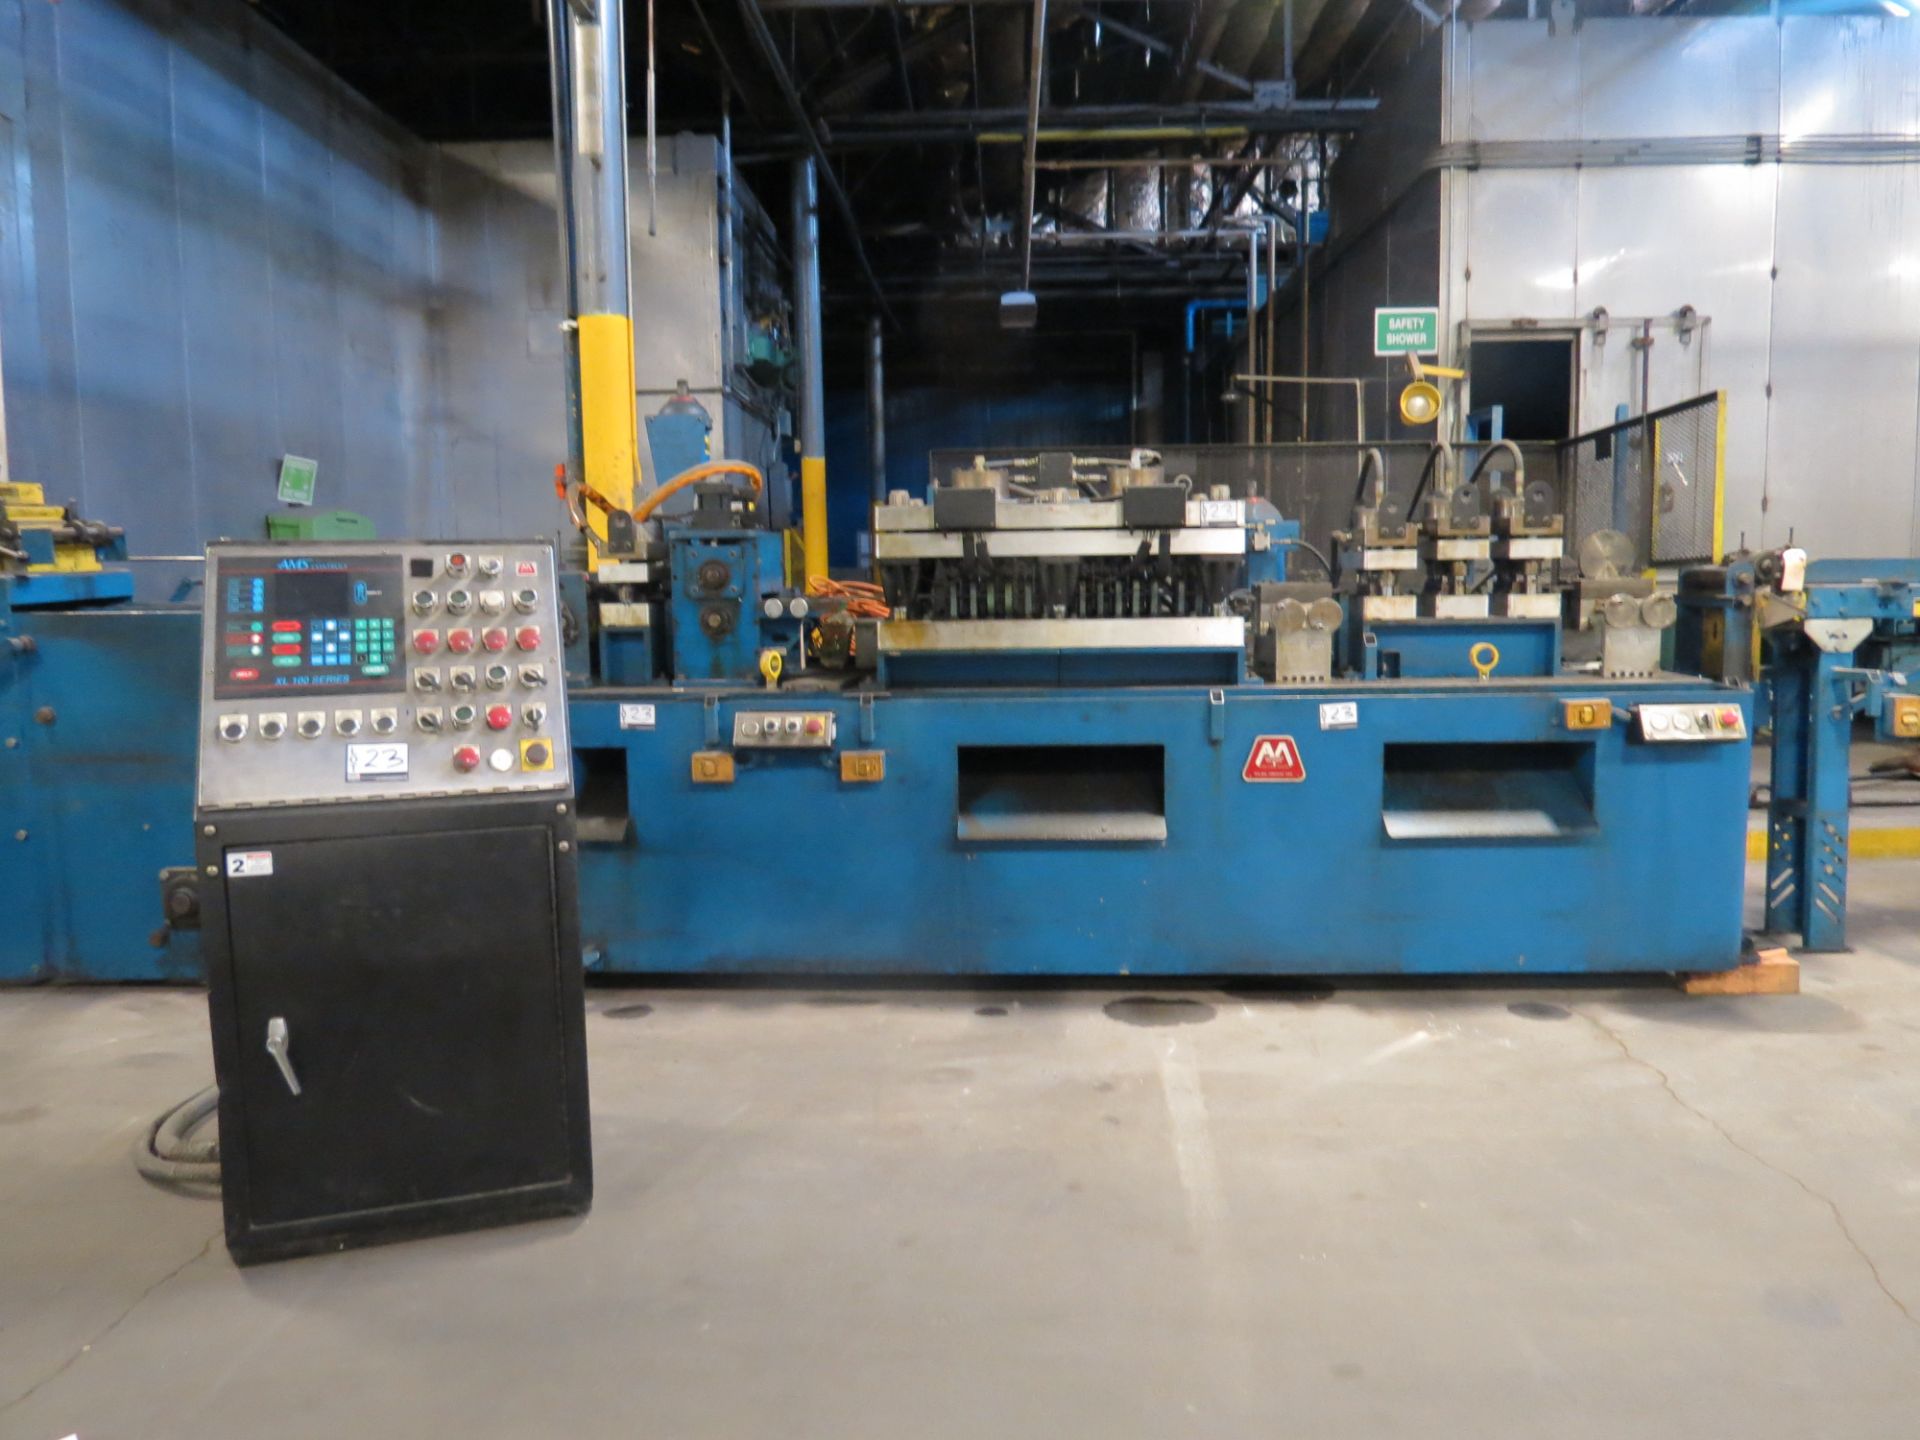 AMS Material Straightener with hyd shear & punches, XL 100 Controls - Image 3 of 7